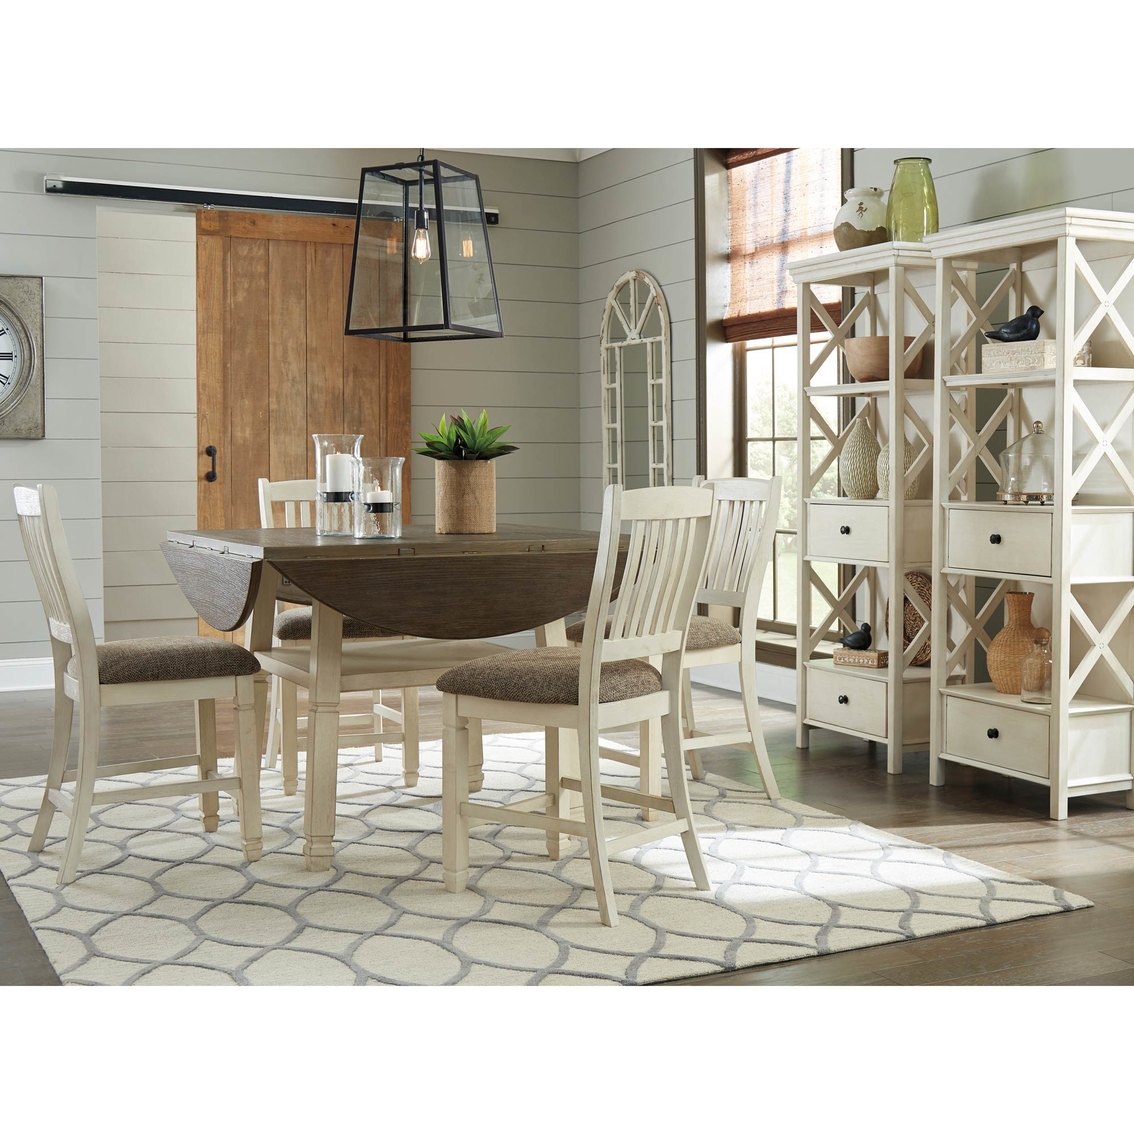 Signature Design by Ashley Bolanburg 5 pc. Drop Leaf Counter Table Set - Image 4 of 4